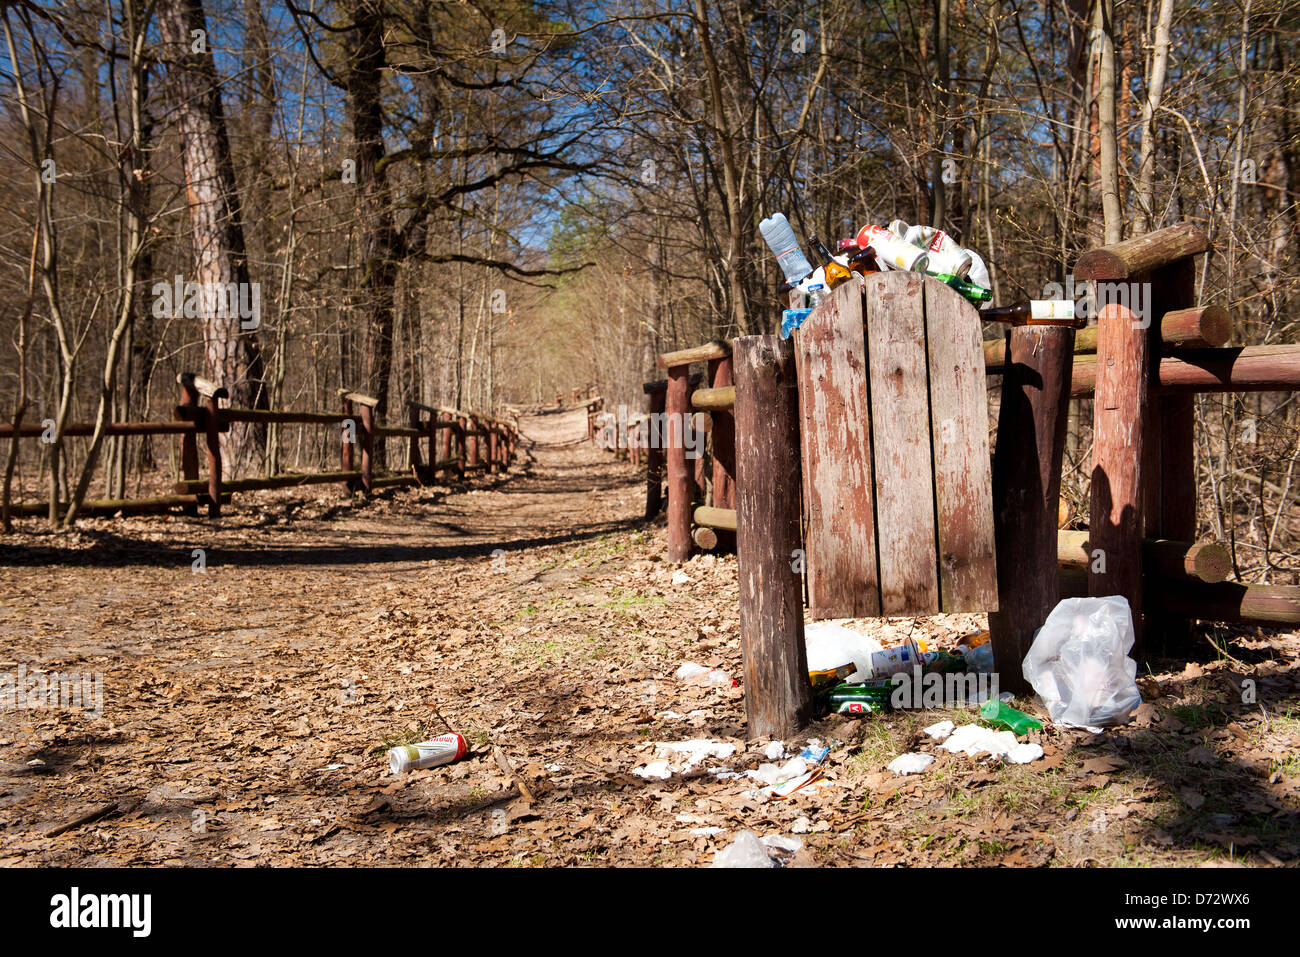 https://c8.alamy.com/comp/D72WX6/plastic-and-paper-garbage-in-the-woods-D72WX6.jpg